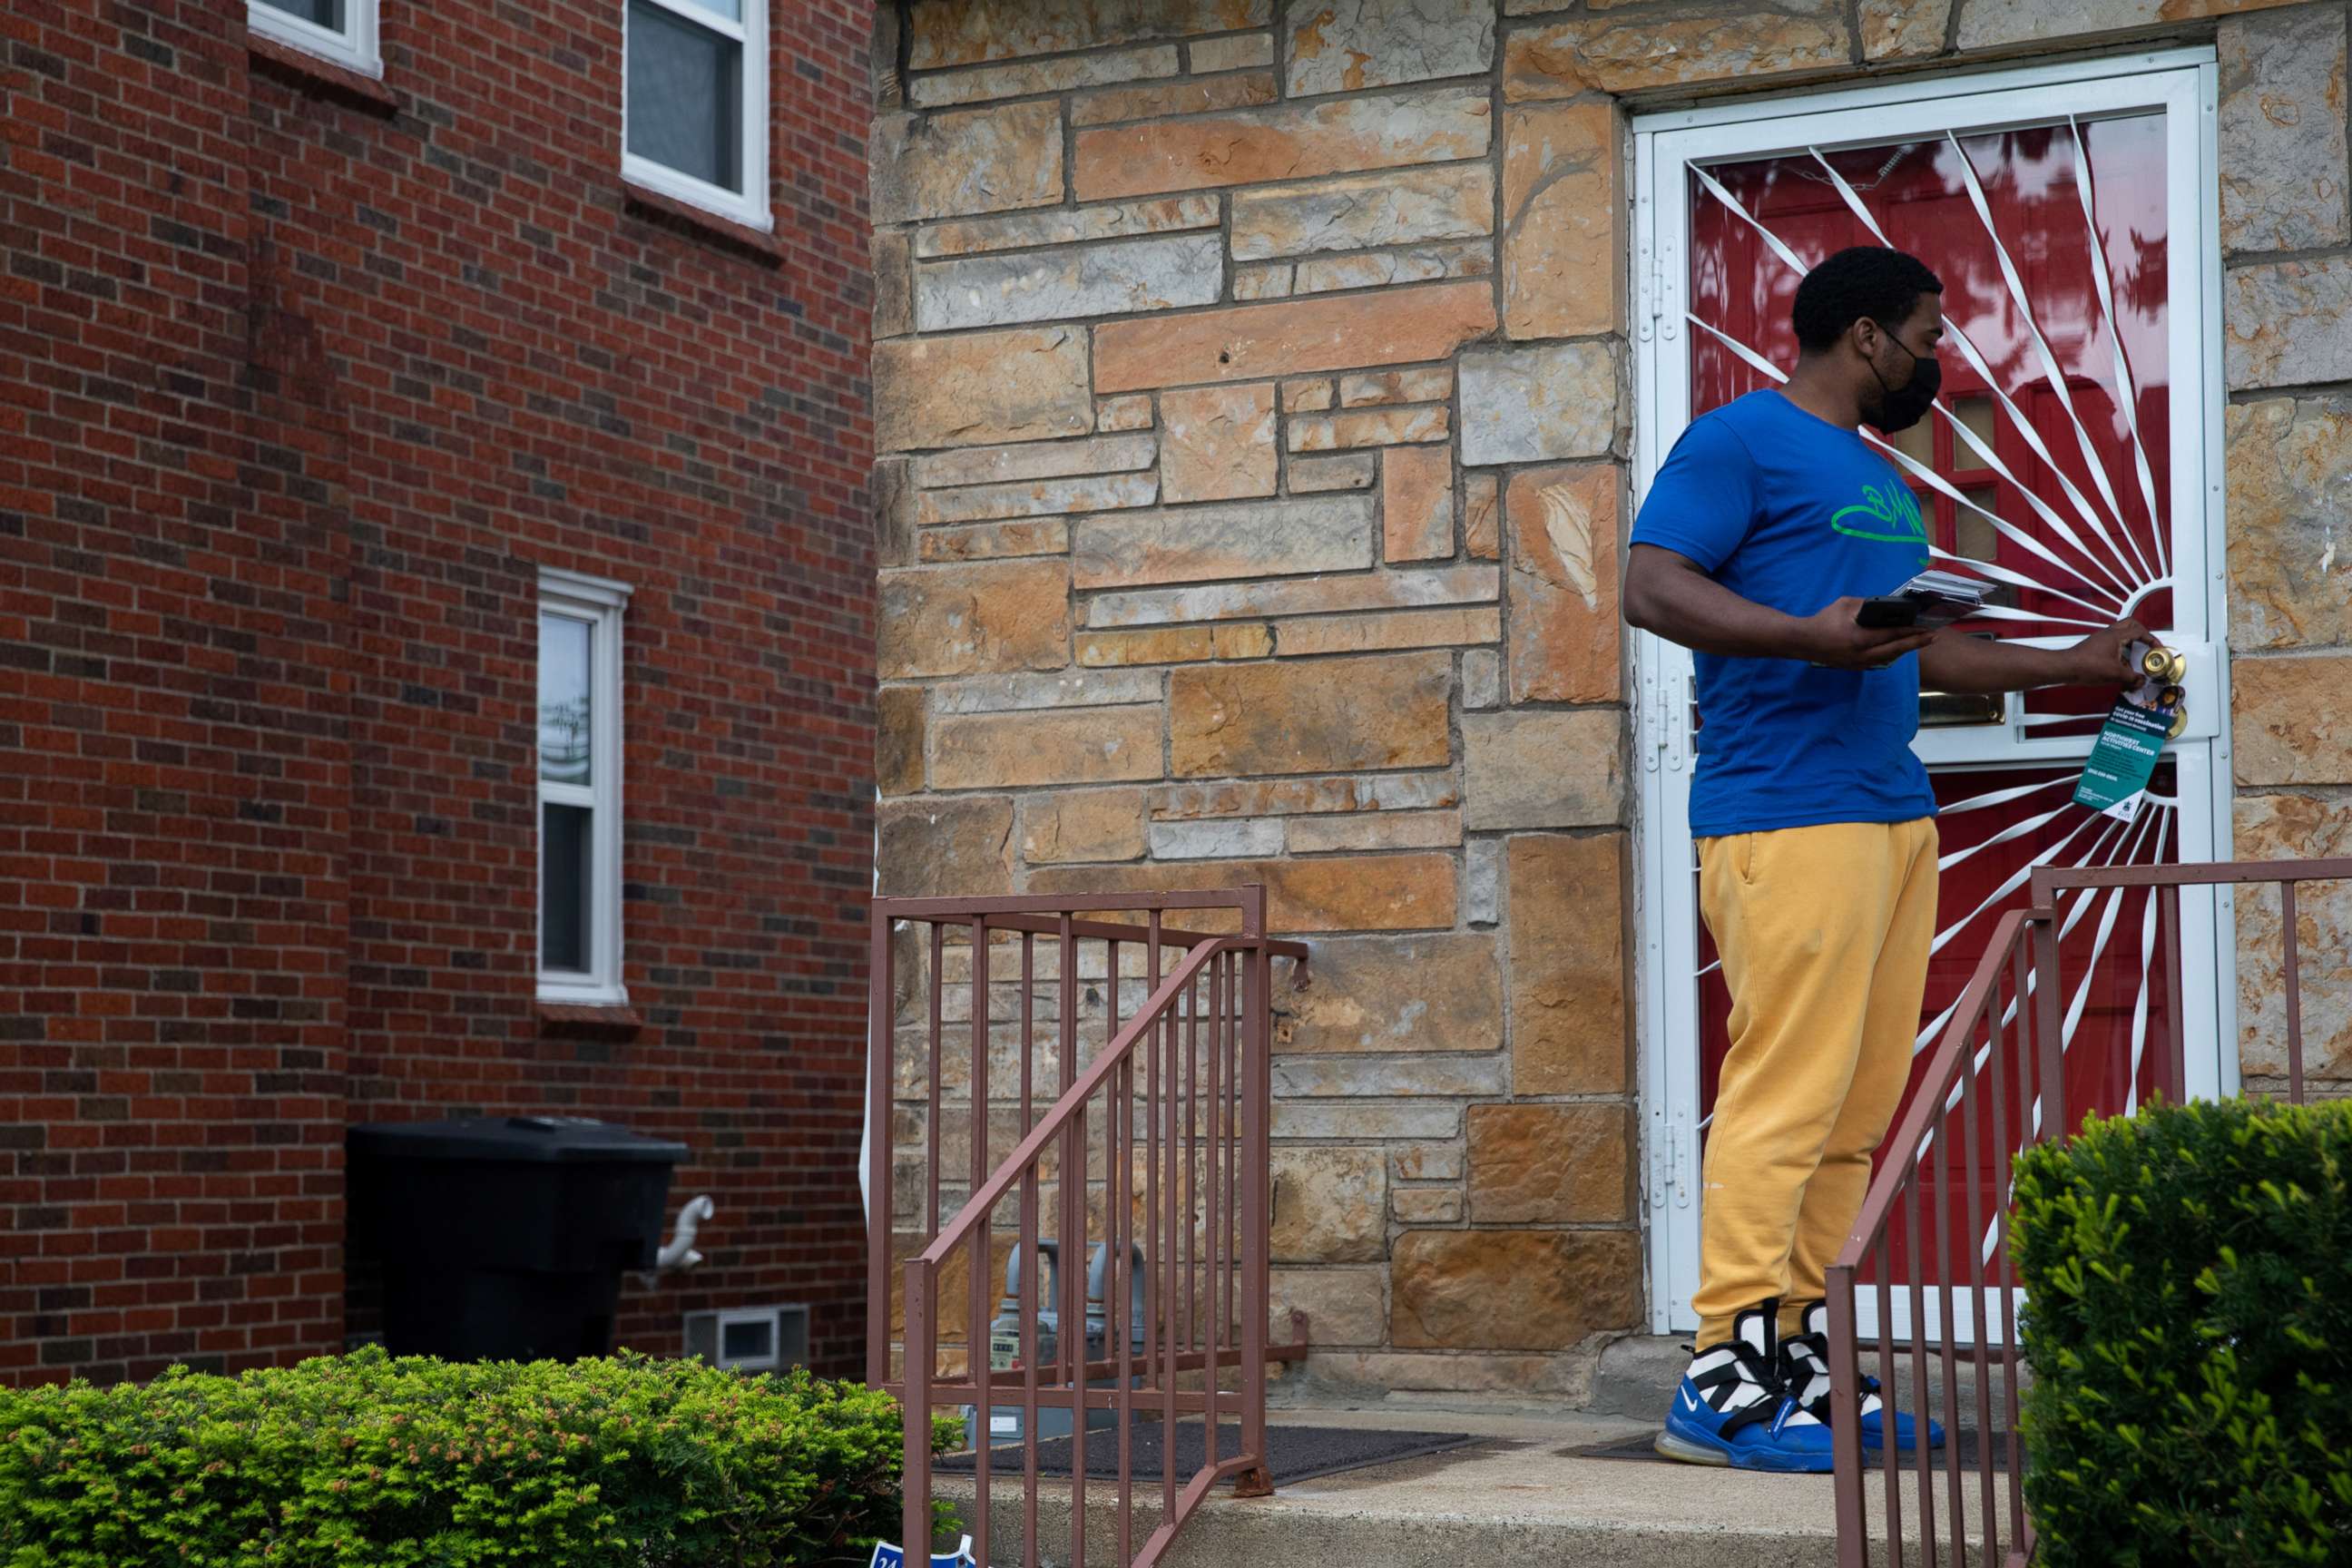 PHOTO: Robert Day from Better Men Outreach knocks on doors during a door-knock campaign to provide information about where people can get their vaccinations and answer questions related to hesitancy around the COVID-19 vaccine in Detroit, May 4, 2021.